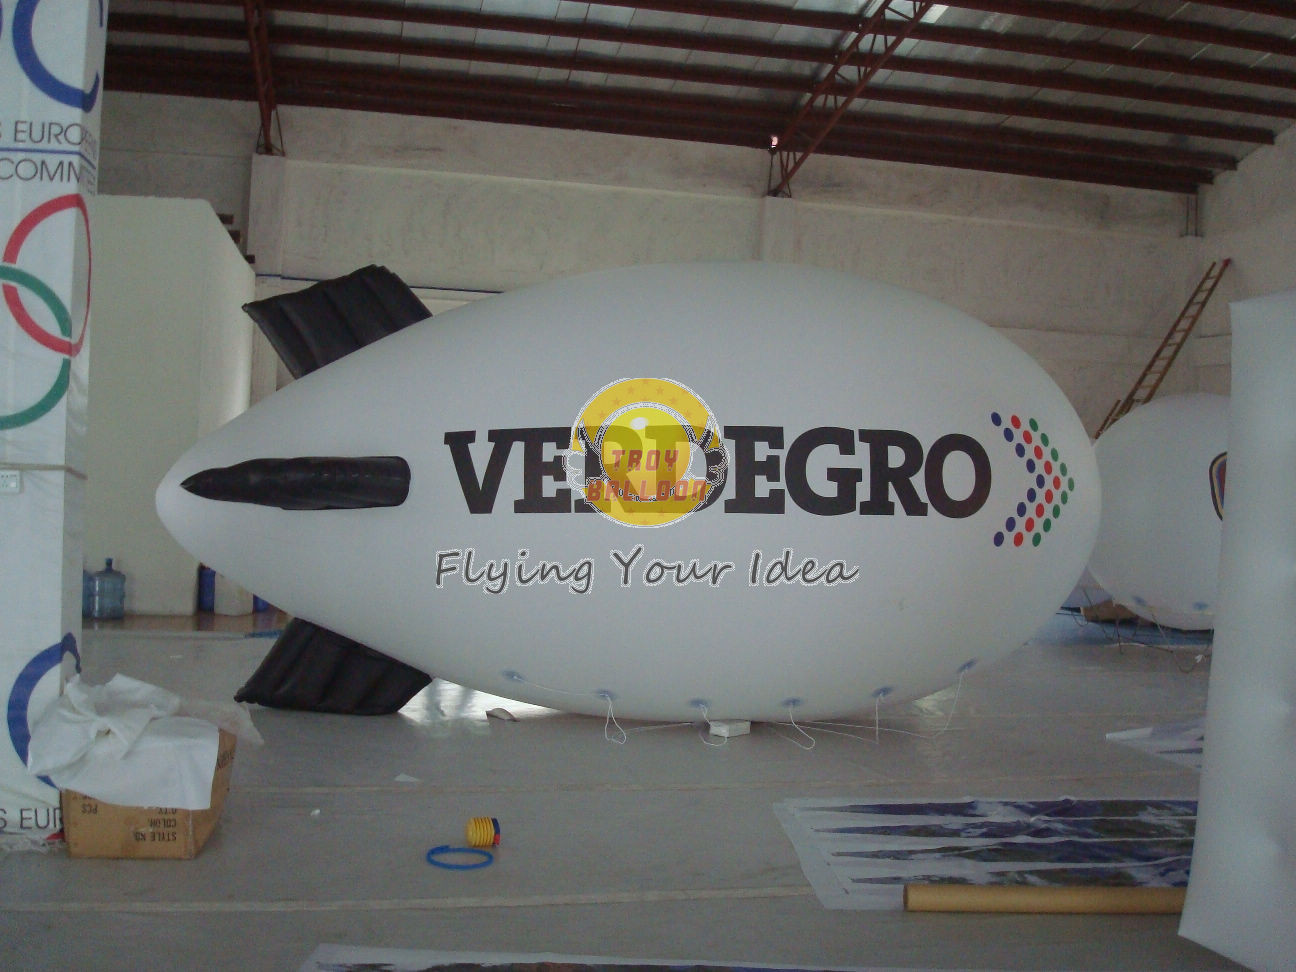  6*2.5m Inflatable Advertising Helium Zeppelin / Blimp Balloons with UV Protected Printing Manufactures